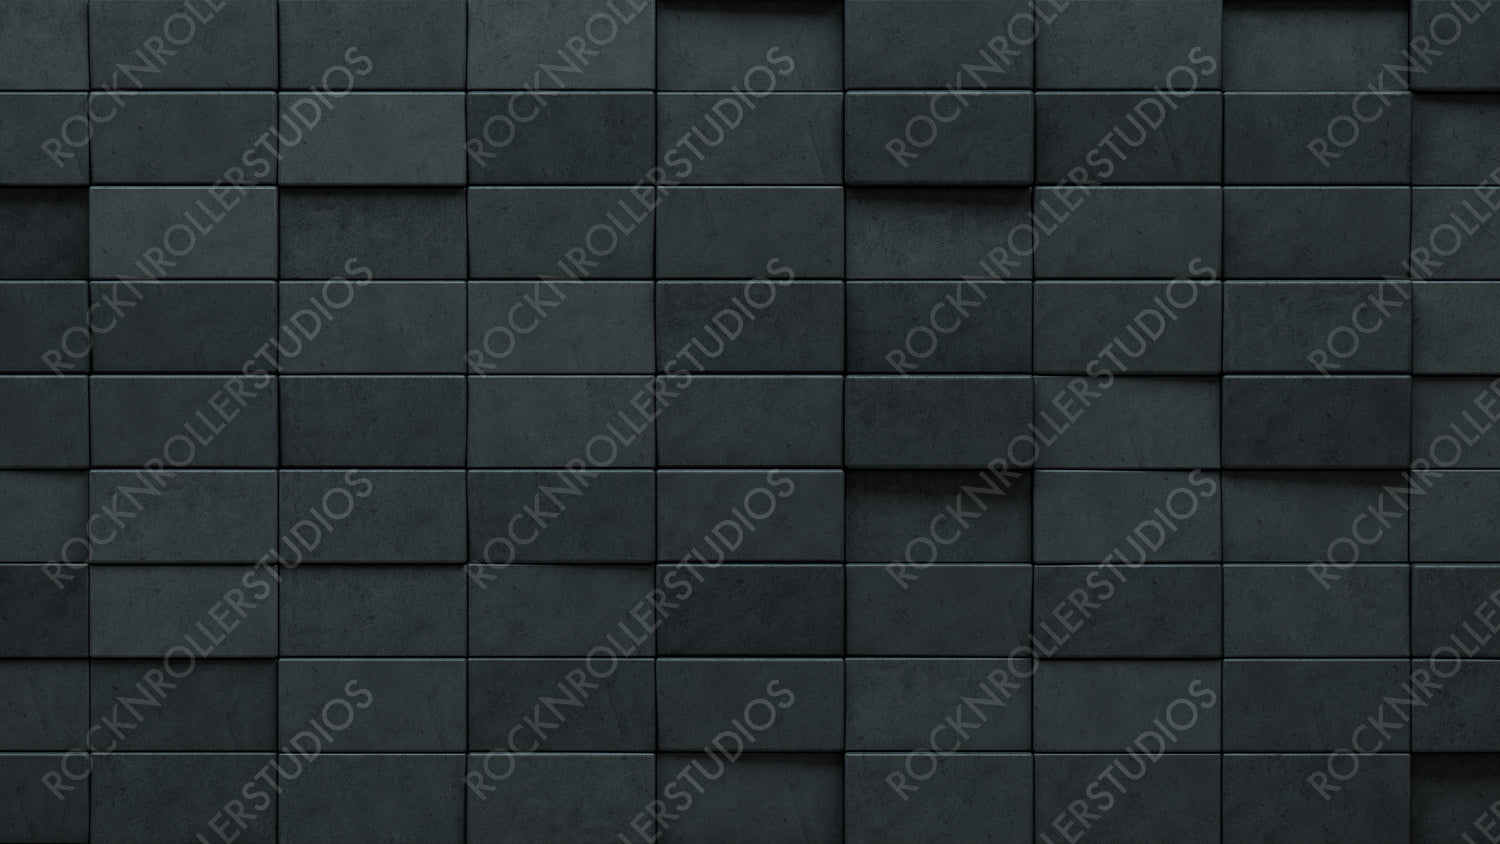 Rectangle, Concrete Mosaic Tiles arranged in the shape of a wall. Polished, Semigloss, Bricks stacked to create a 3D block background. 3D Render